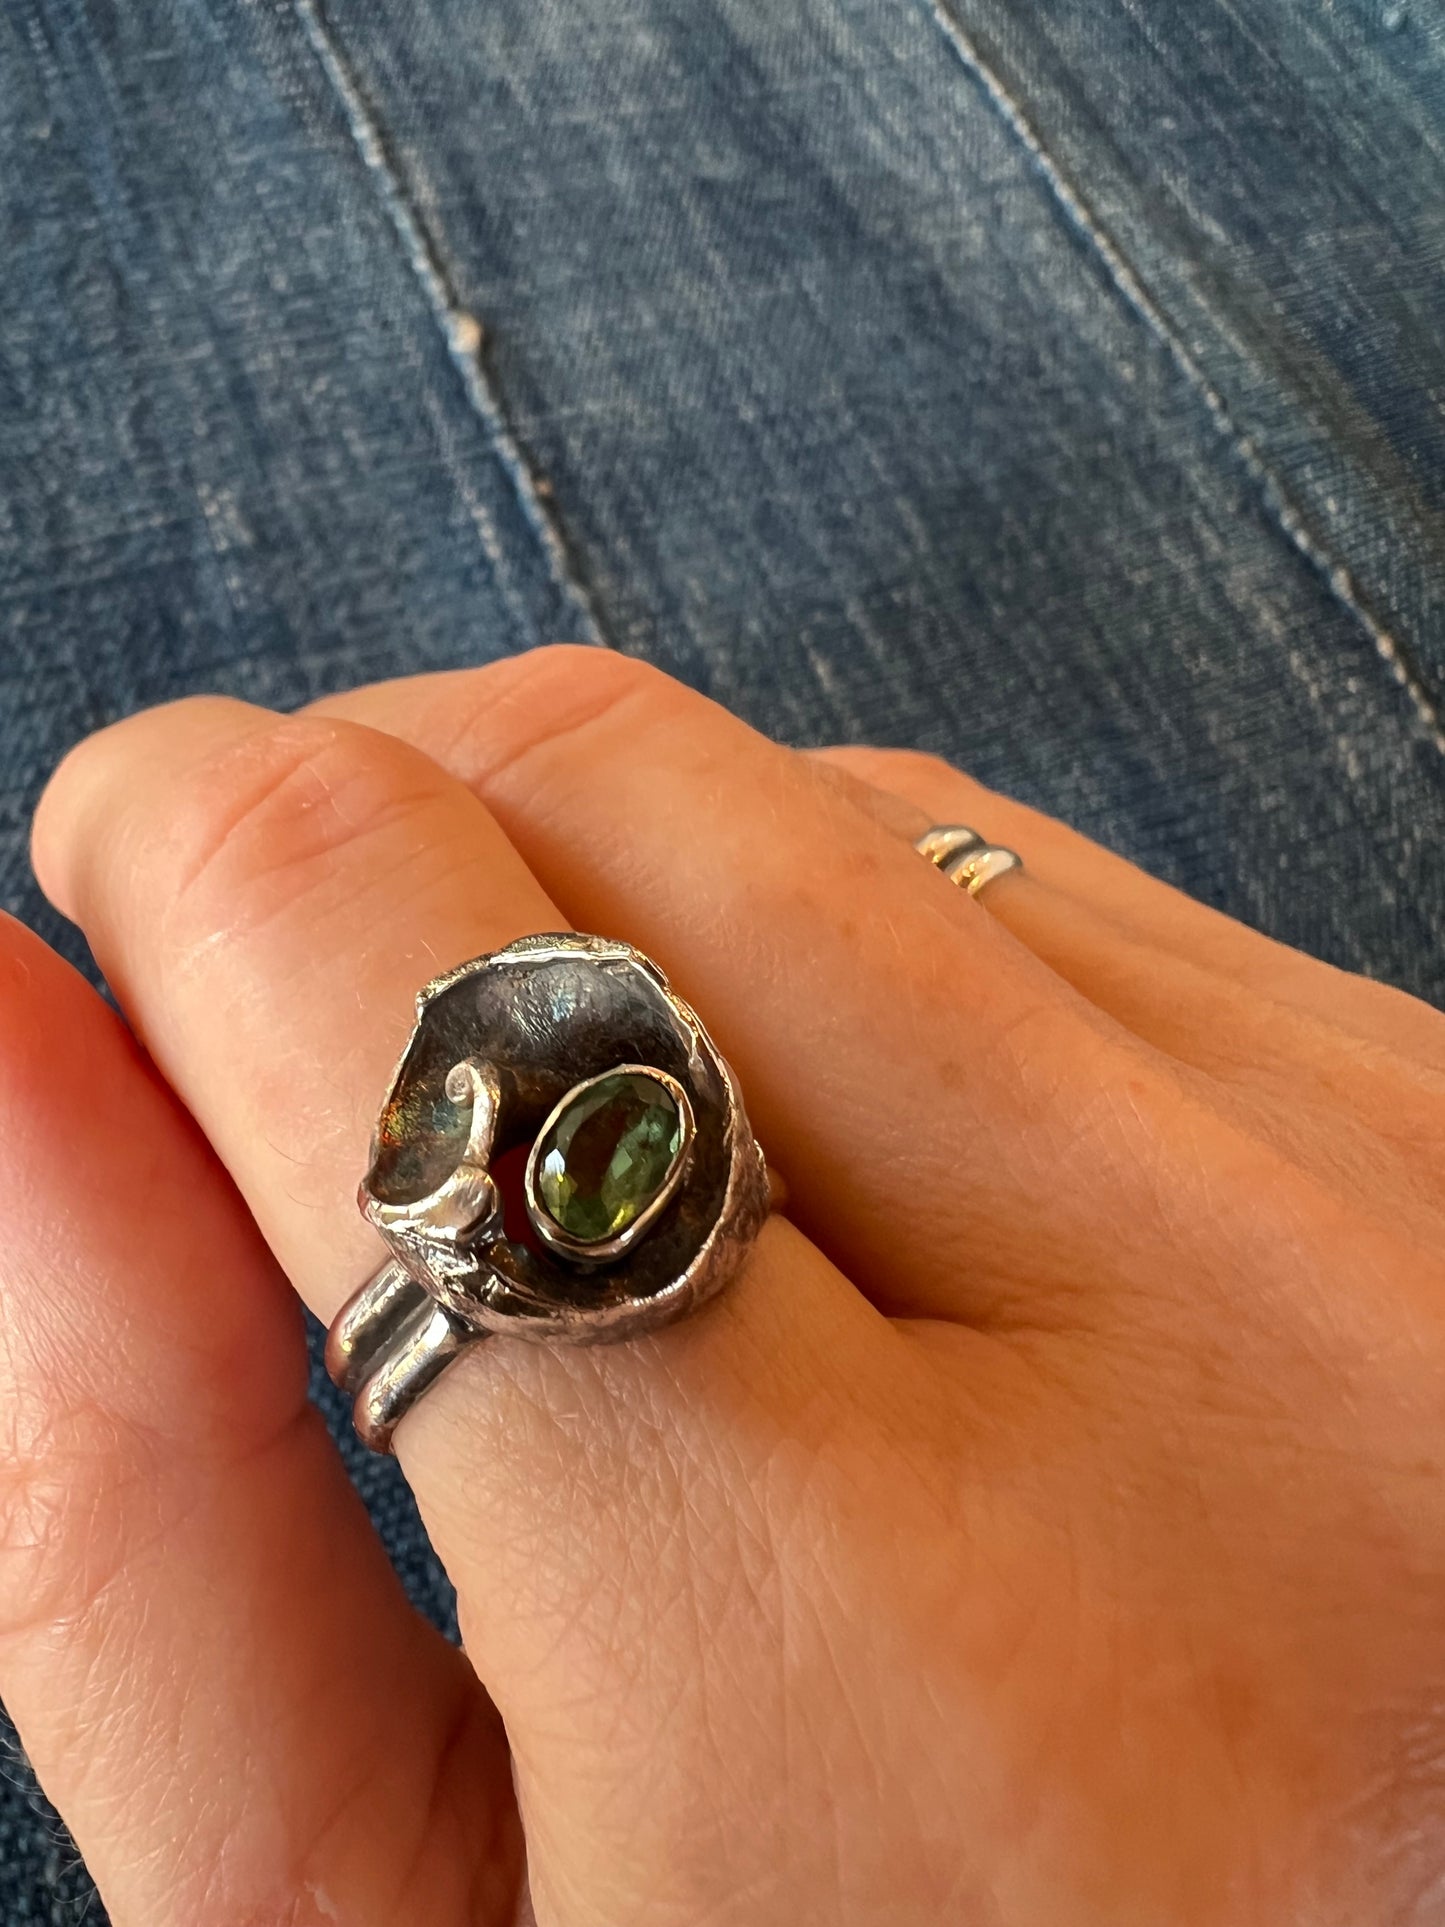 Oxidized Sterling Silver Conch Shell Fragment Ring with Misty Green Tourmaline - Salt Series - One of a Kind